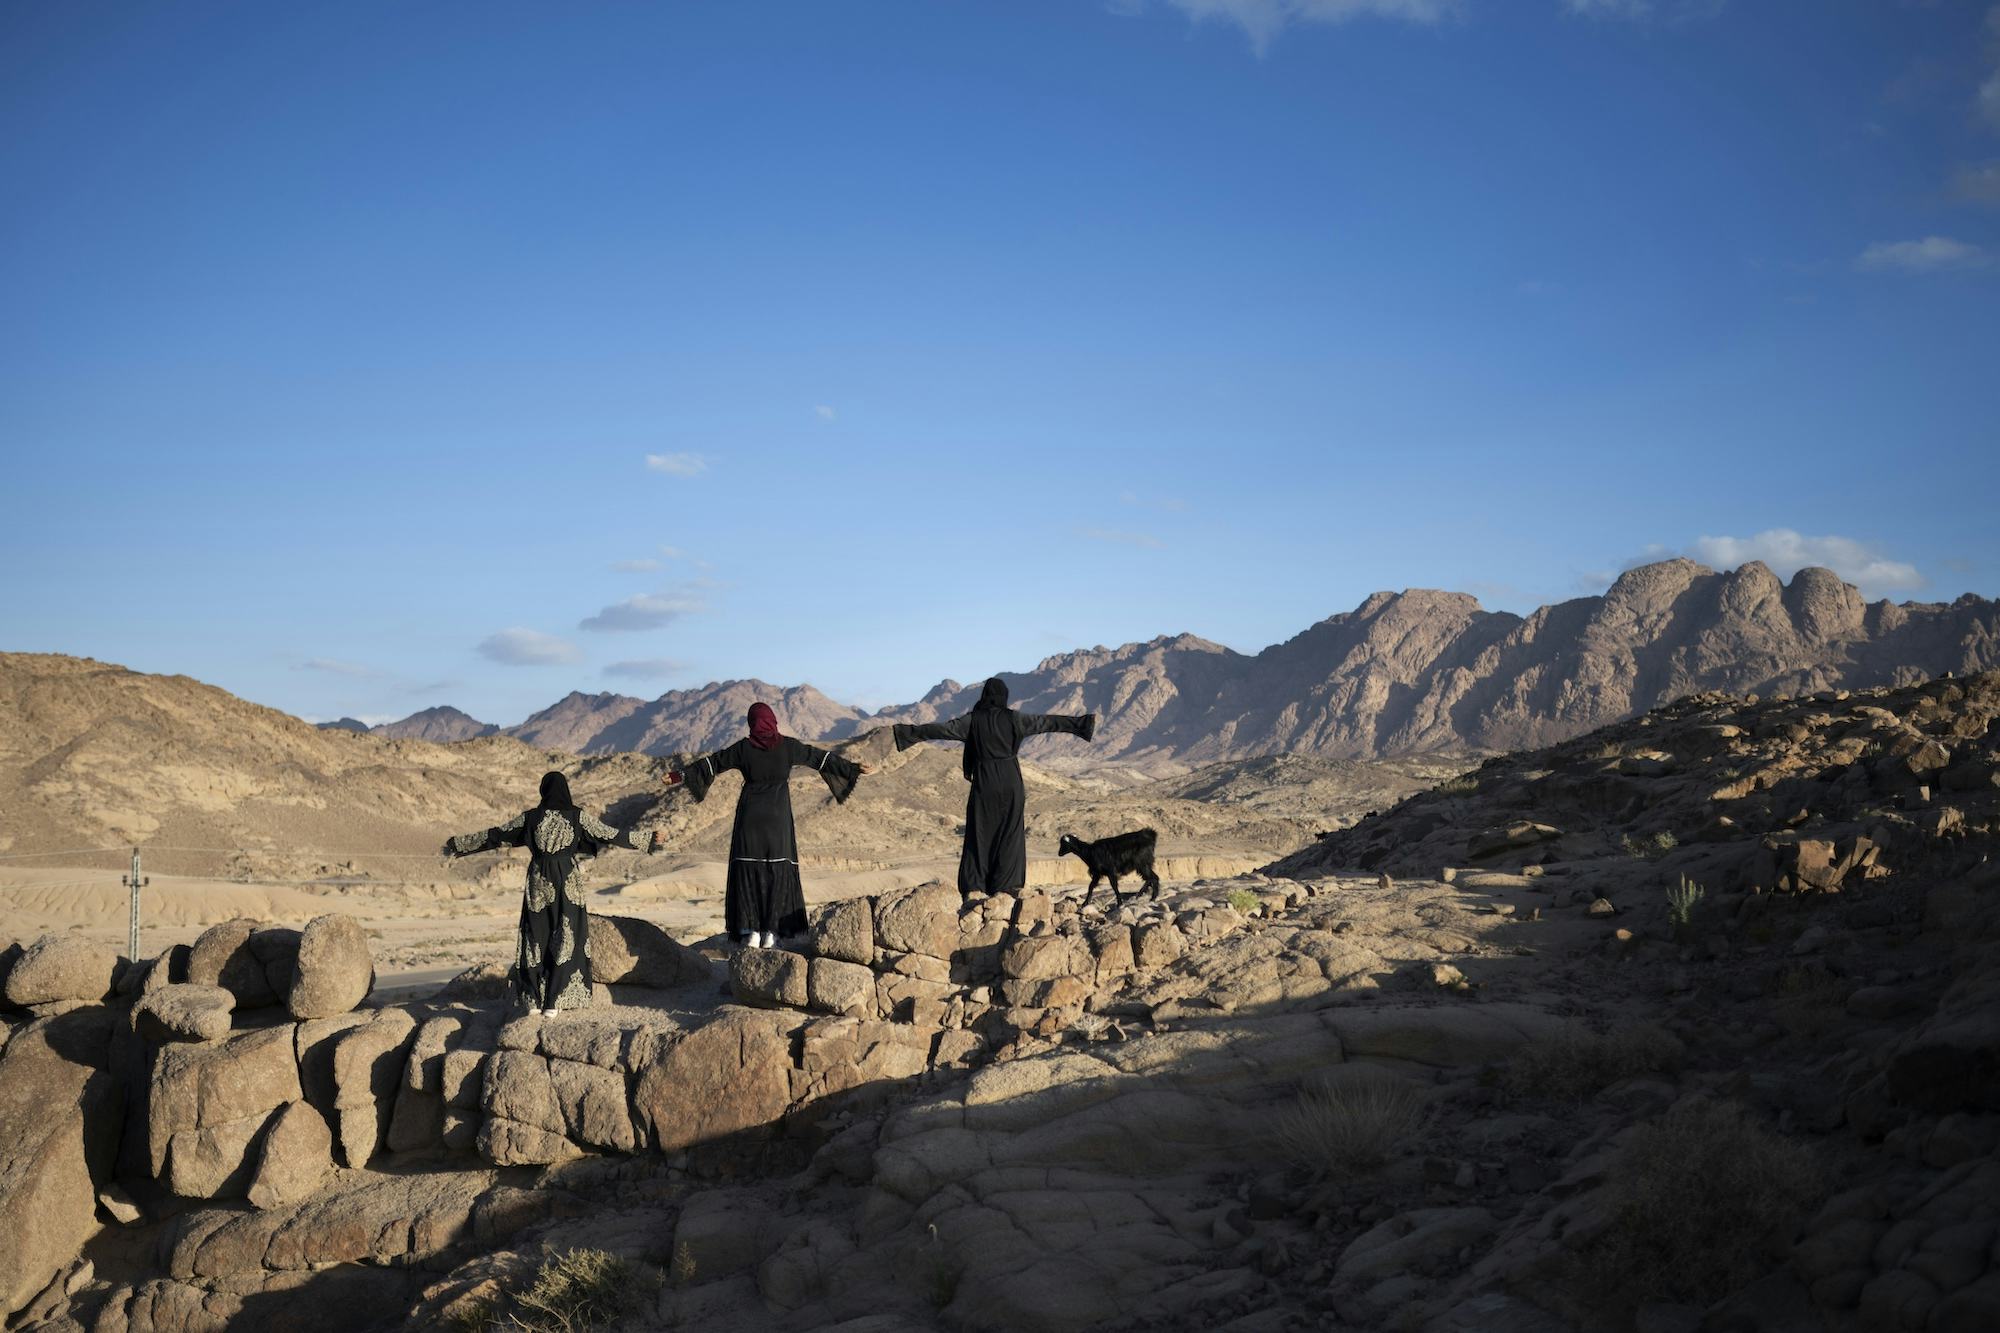 Three women of the Bedouin community in South Sinai, Egypt, herd their sheep across the moutains. They stand in a line with their arms spread out, overseeing the valley. © Rehab Eldalil